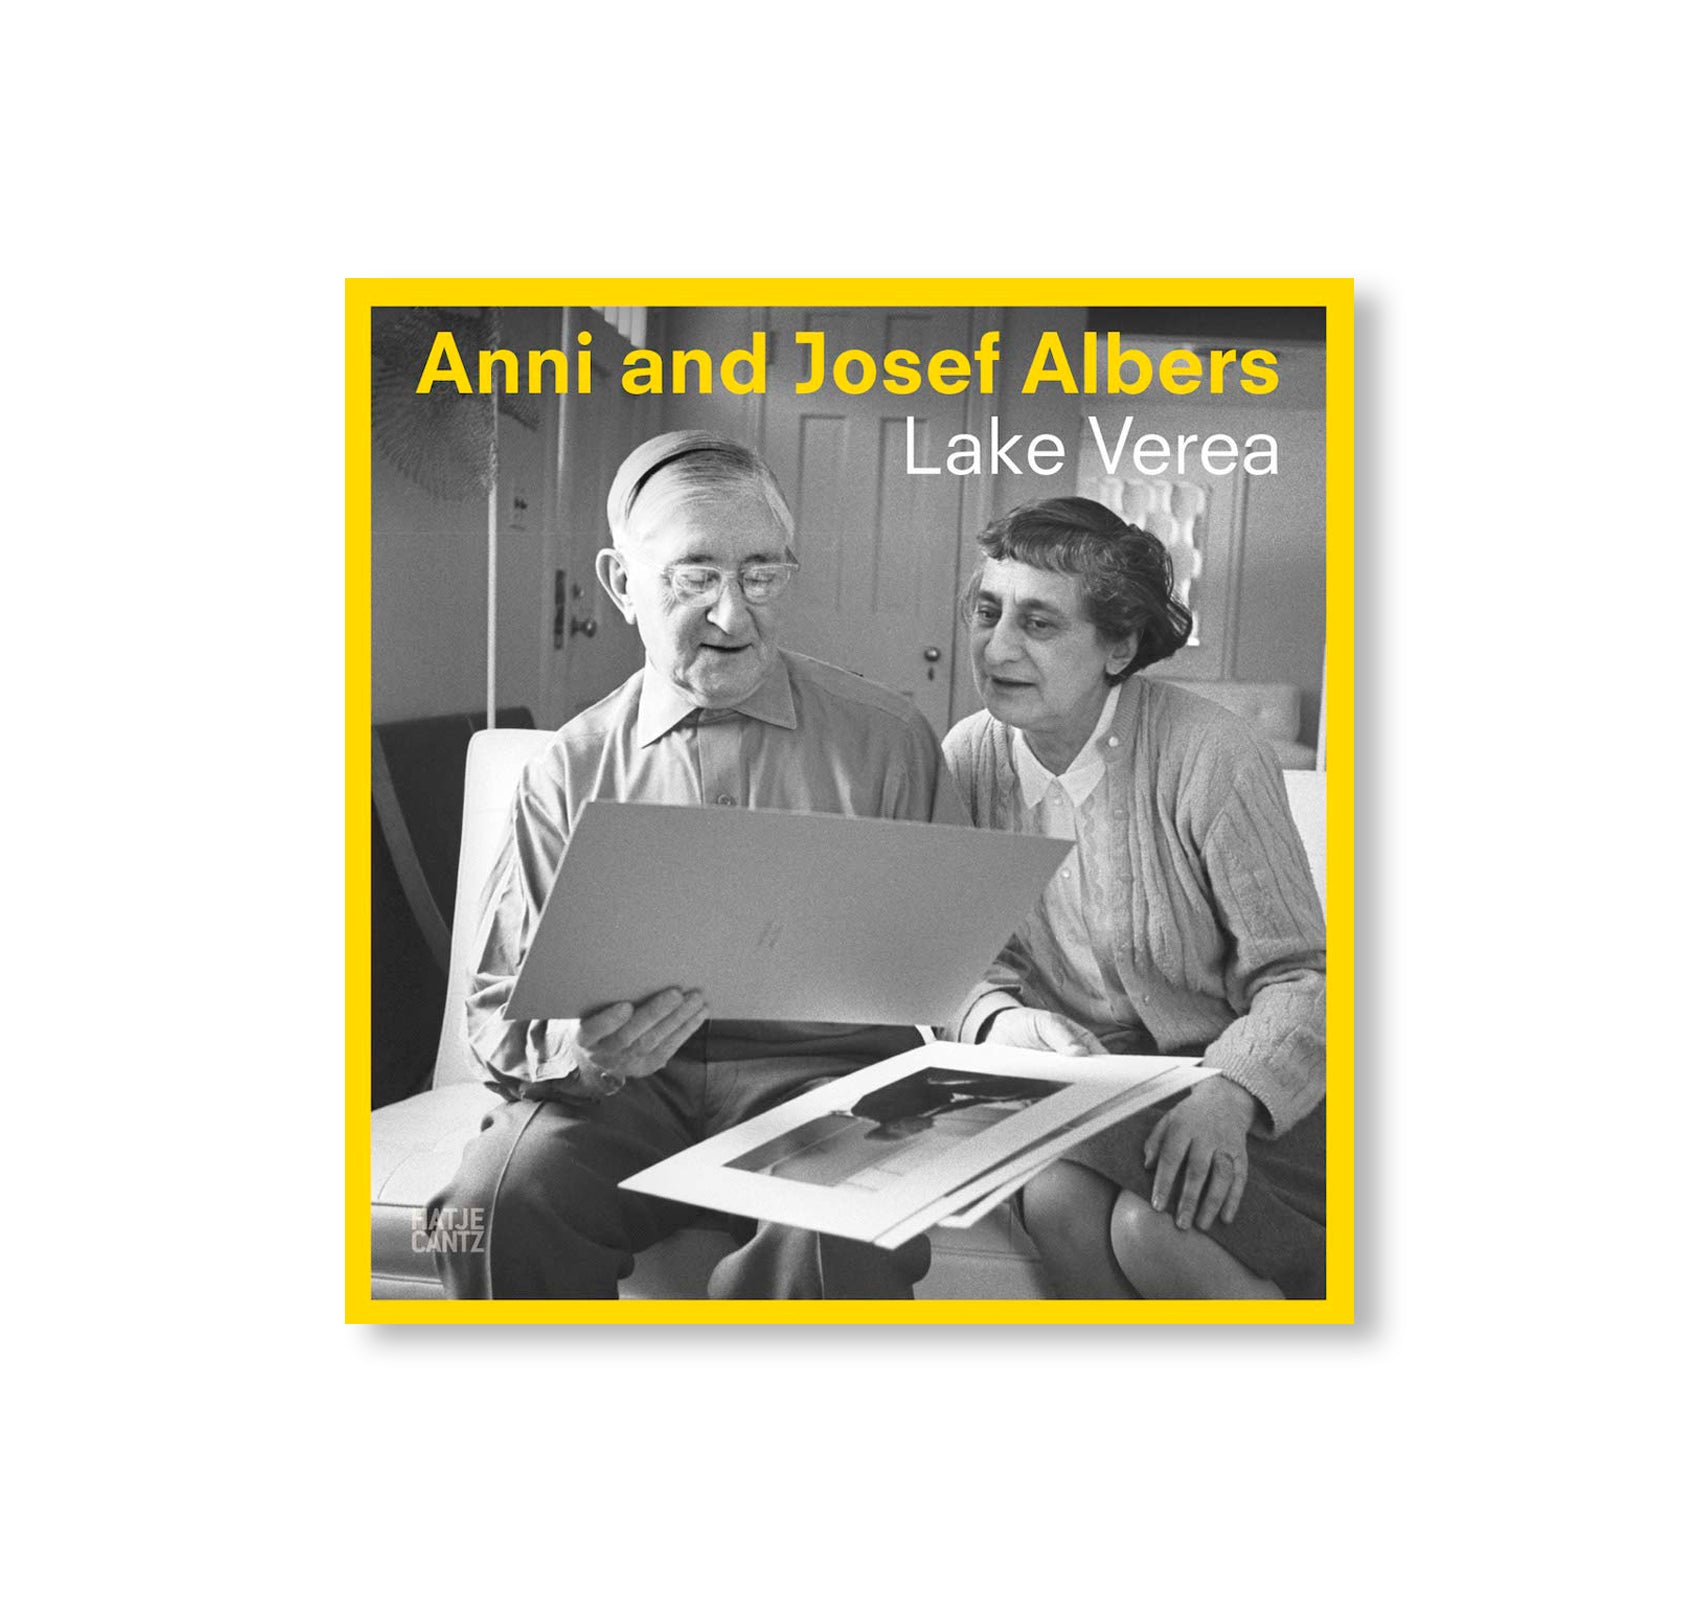 ANNI AND JOSEF ALBERS by Lake Verea